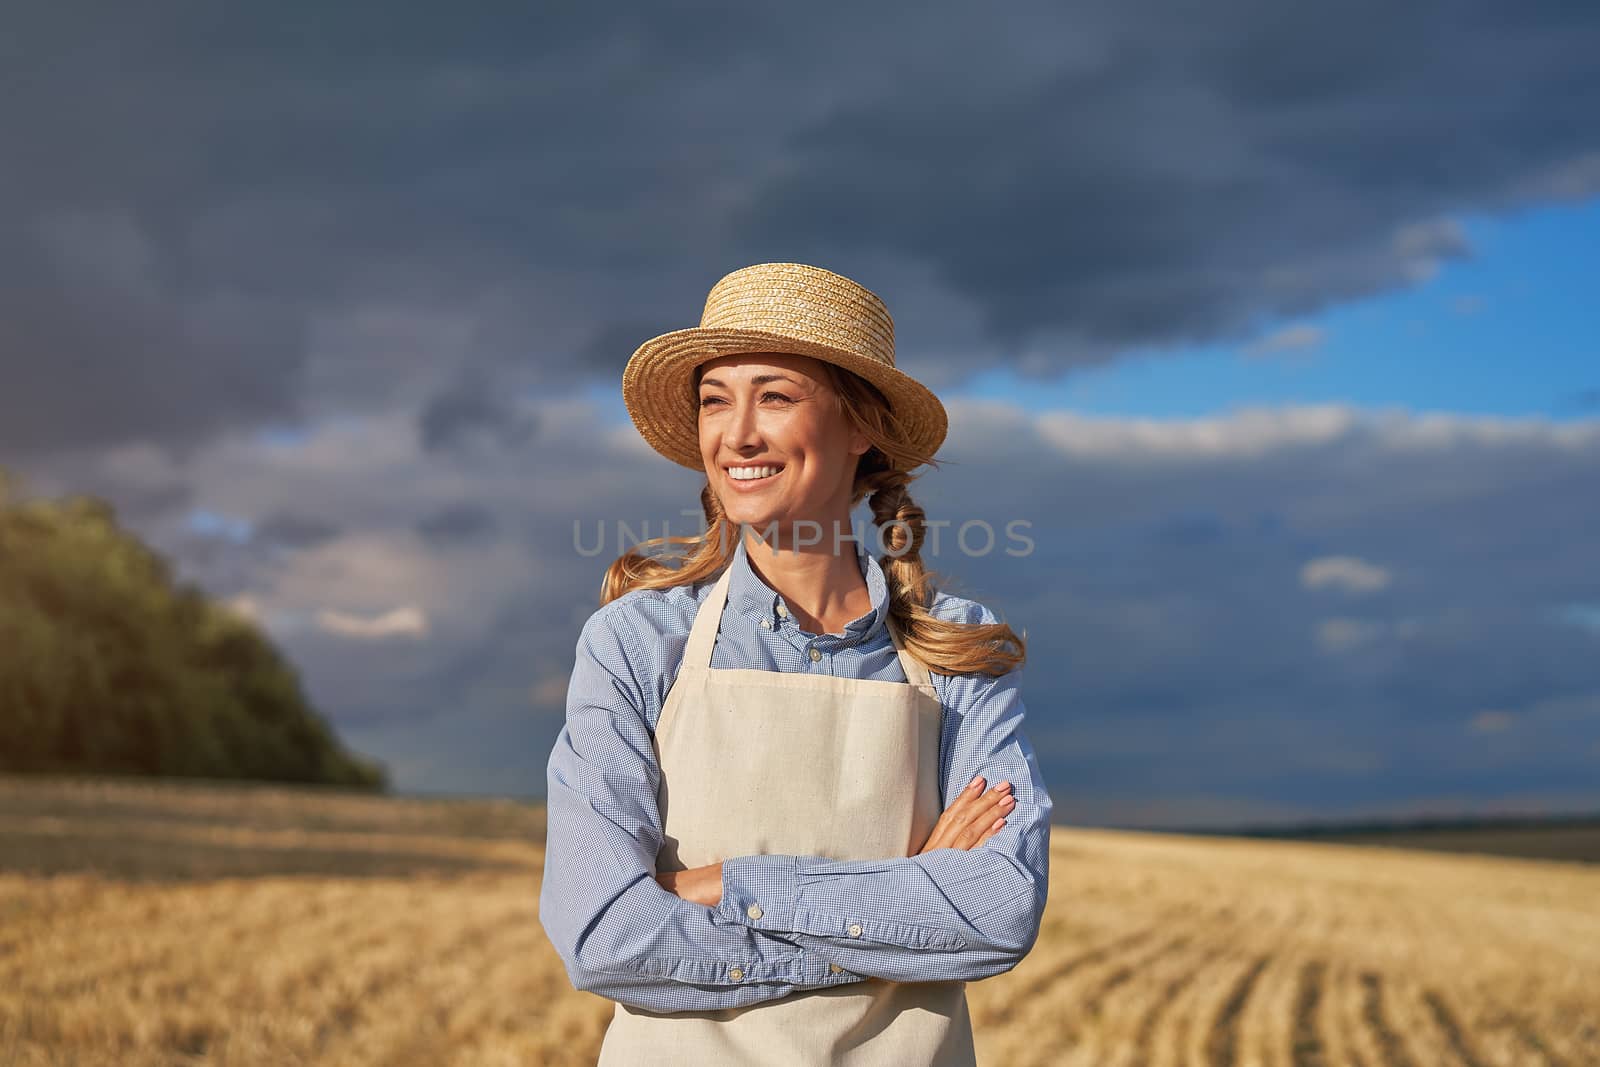 Woman farmer straw hat apron standing farmland smiling Female agronomist specialist farming agribusiness Positive caucasian worker agricultural field arms crossed cloudy sky background before rain